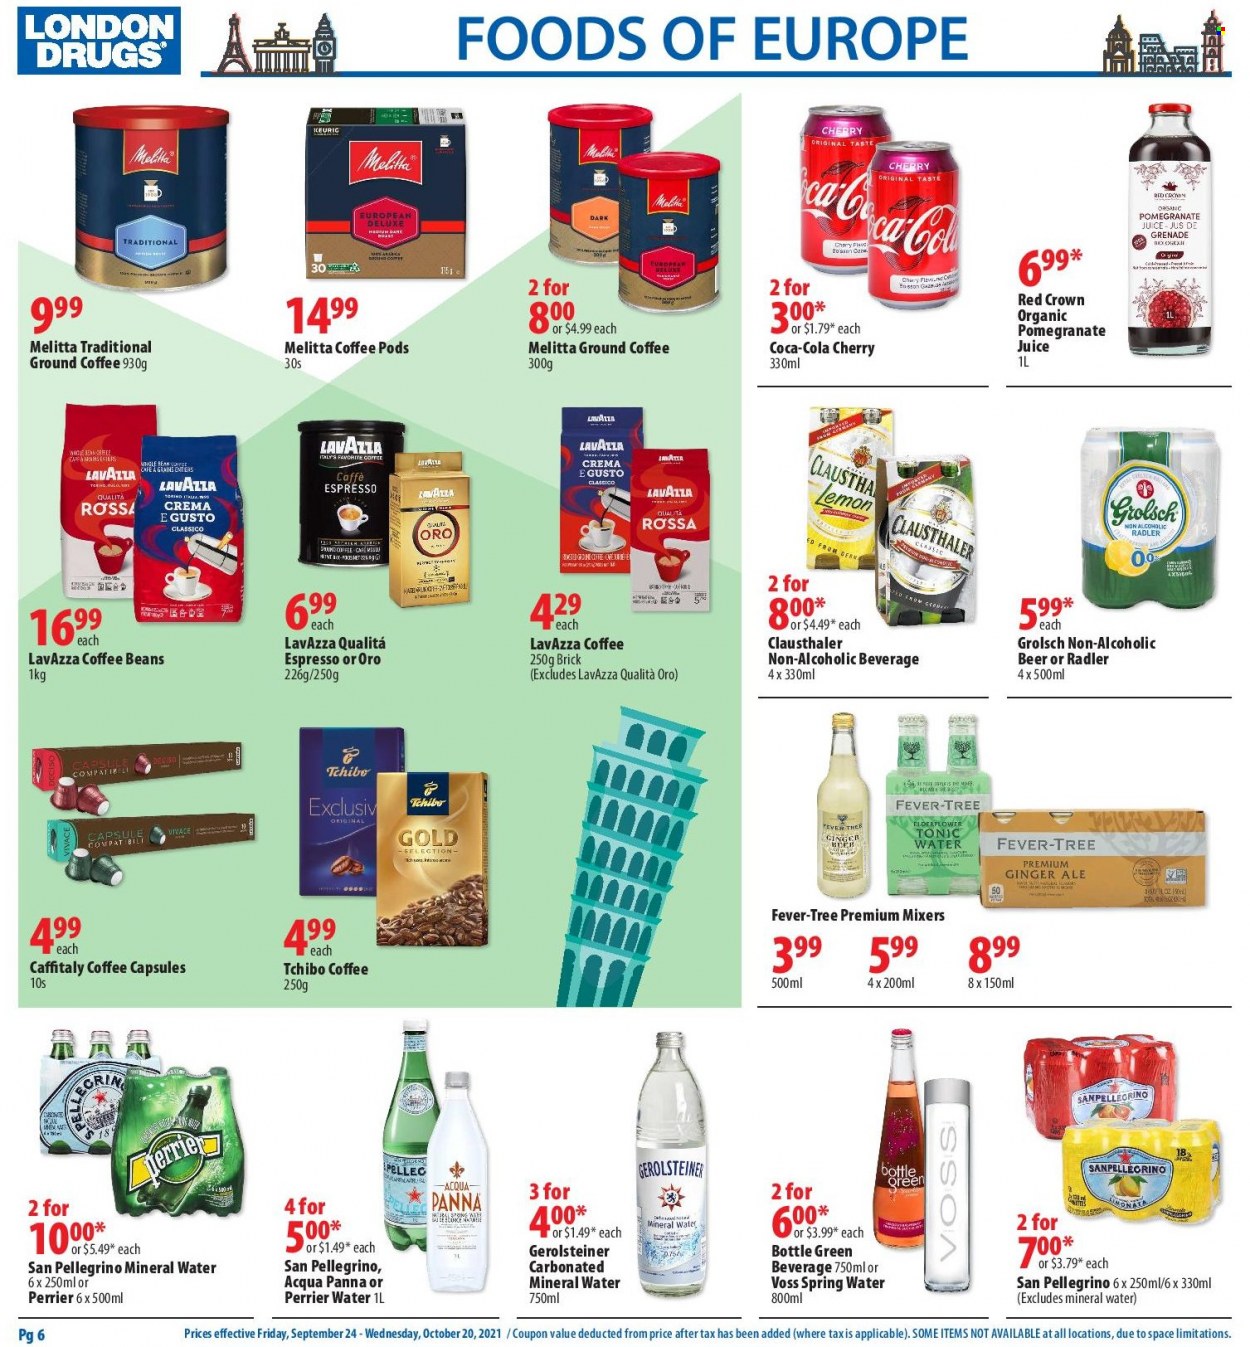 thumbnail - London Drugs Flyer - September 24, 2021 - October 20, 2021 - Sales products - Classico, Coca-Cola, ginger ale, juice, tonic, Perrier, mineral water, spring water, Voss, San Pellegrino, coffee pods, coffee beans, ground coffee, coffee capsules, Keurig, Lavazza, beer, Grolsch. Page 6.